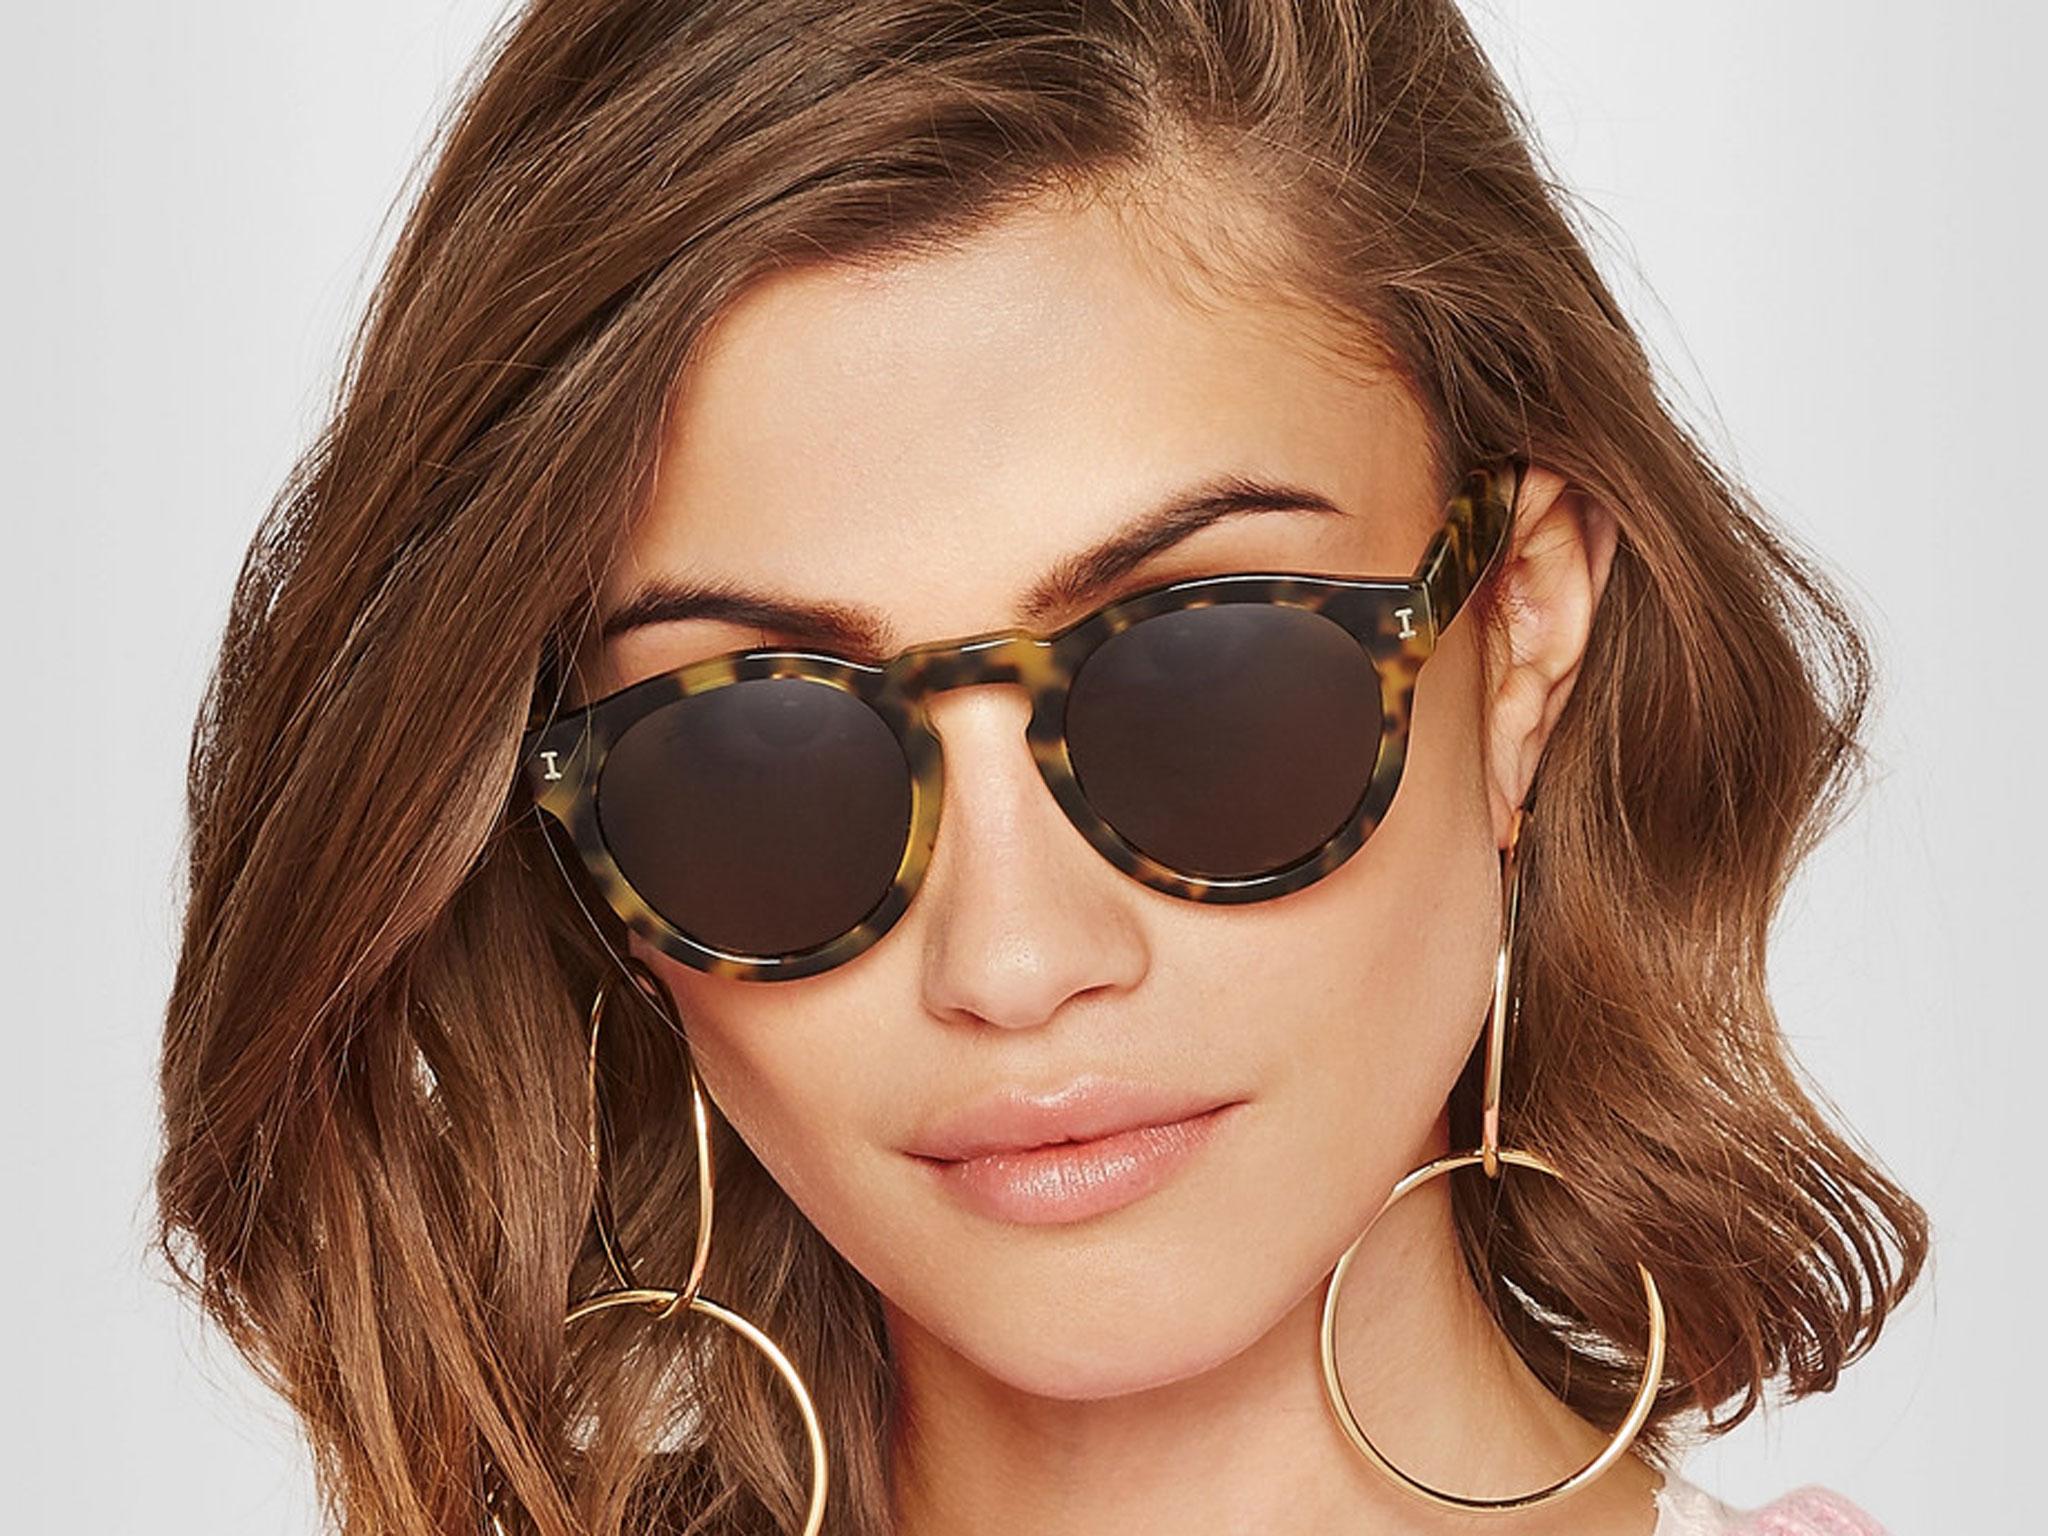 Sunglasses women ban faces small ray for with cheap cute